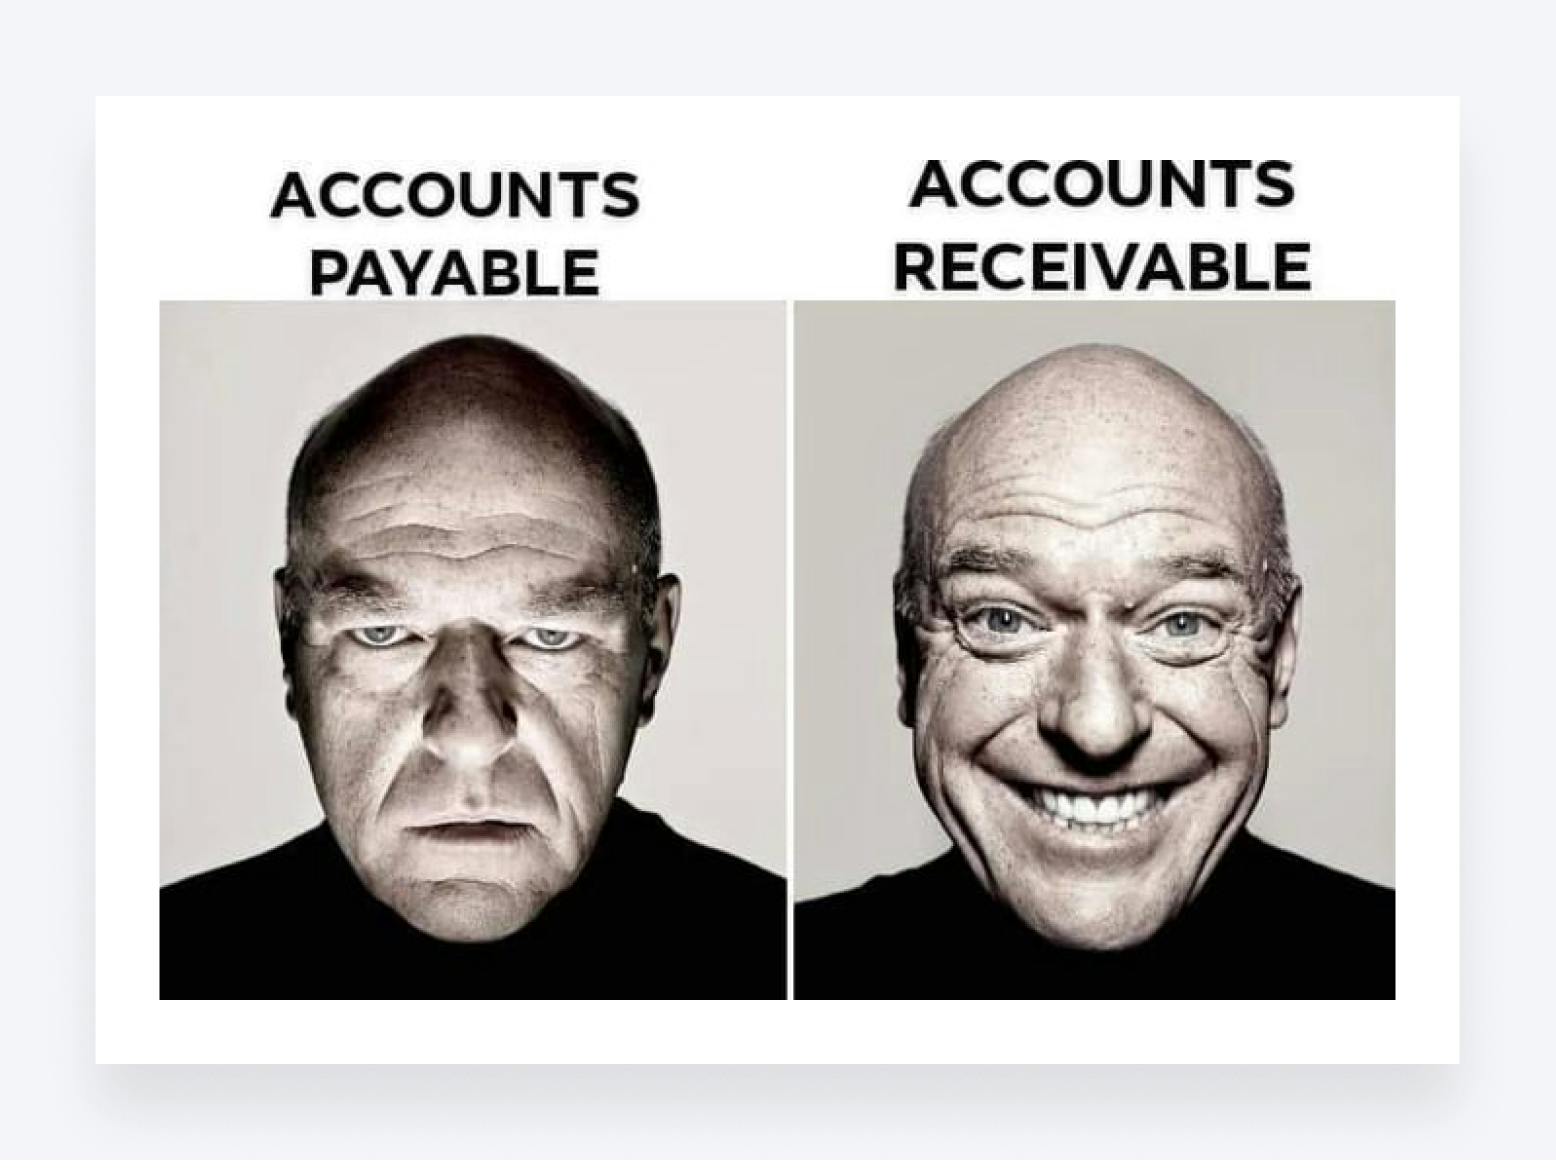 Accounting meme of the frequently mixed up accounts payable and accounts receivable terms